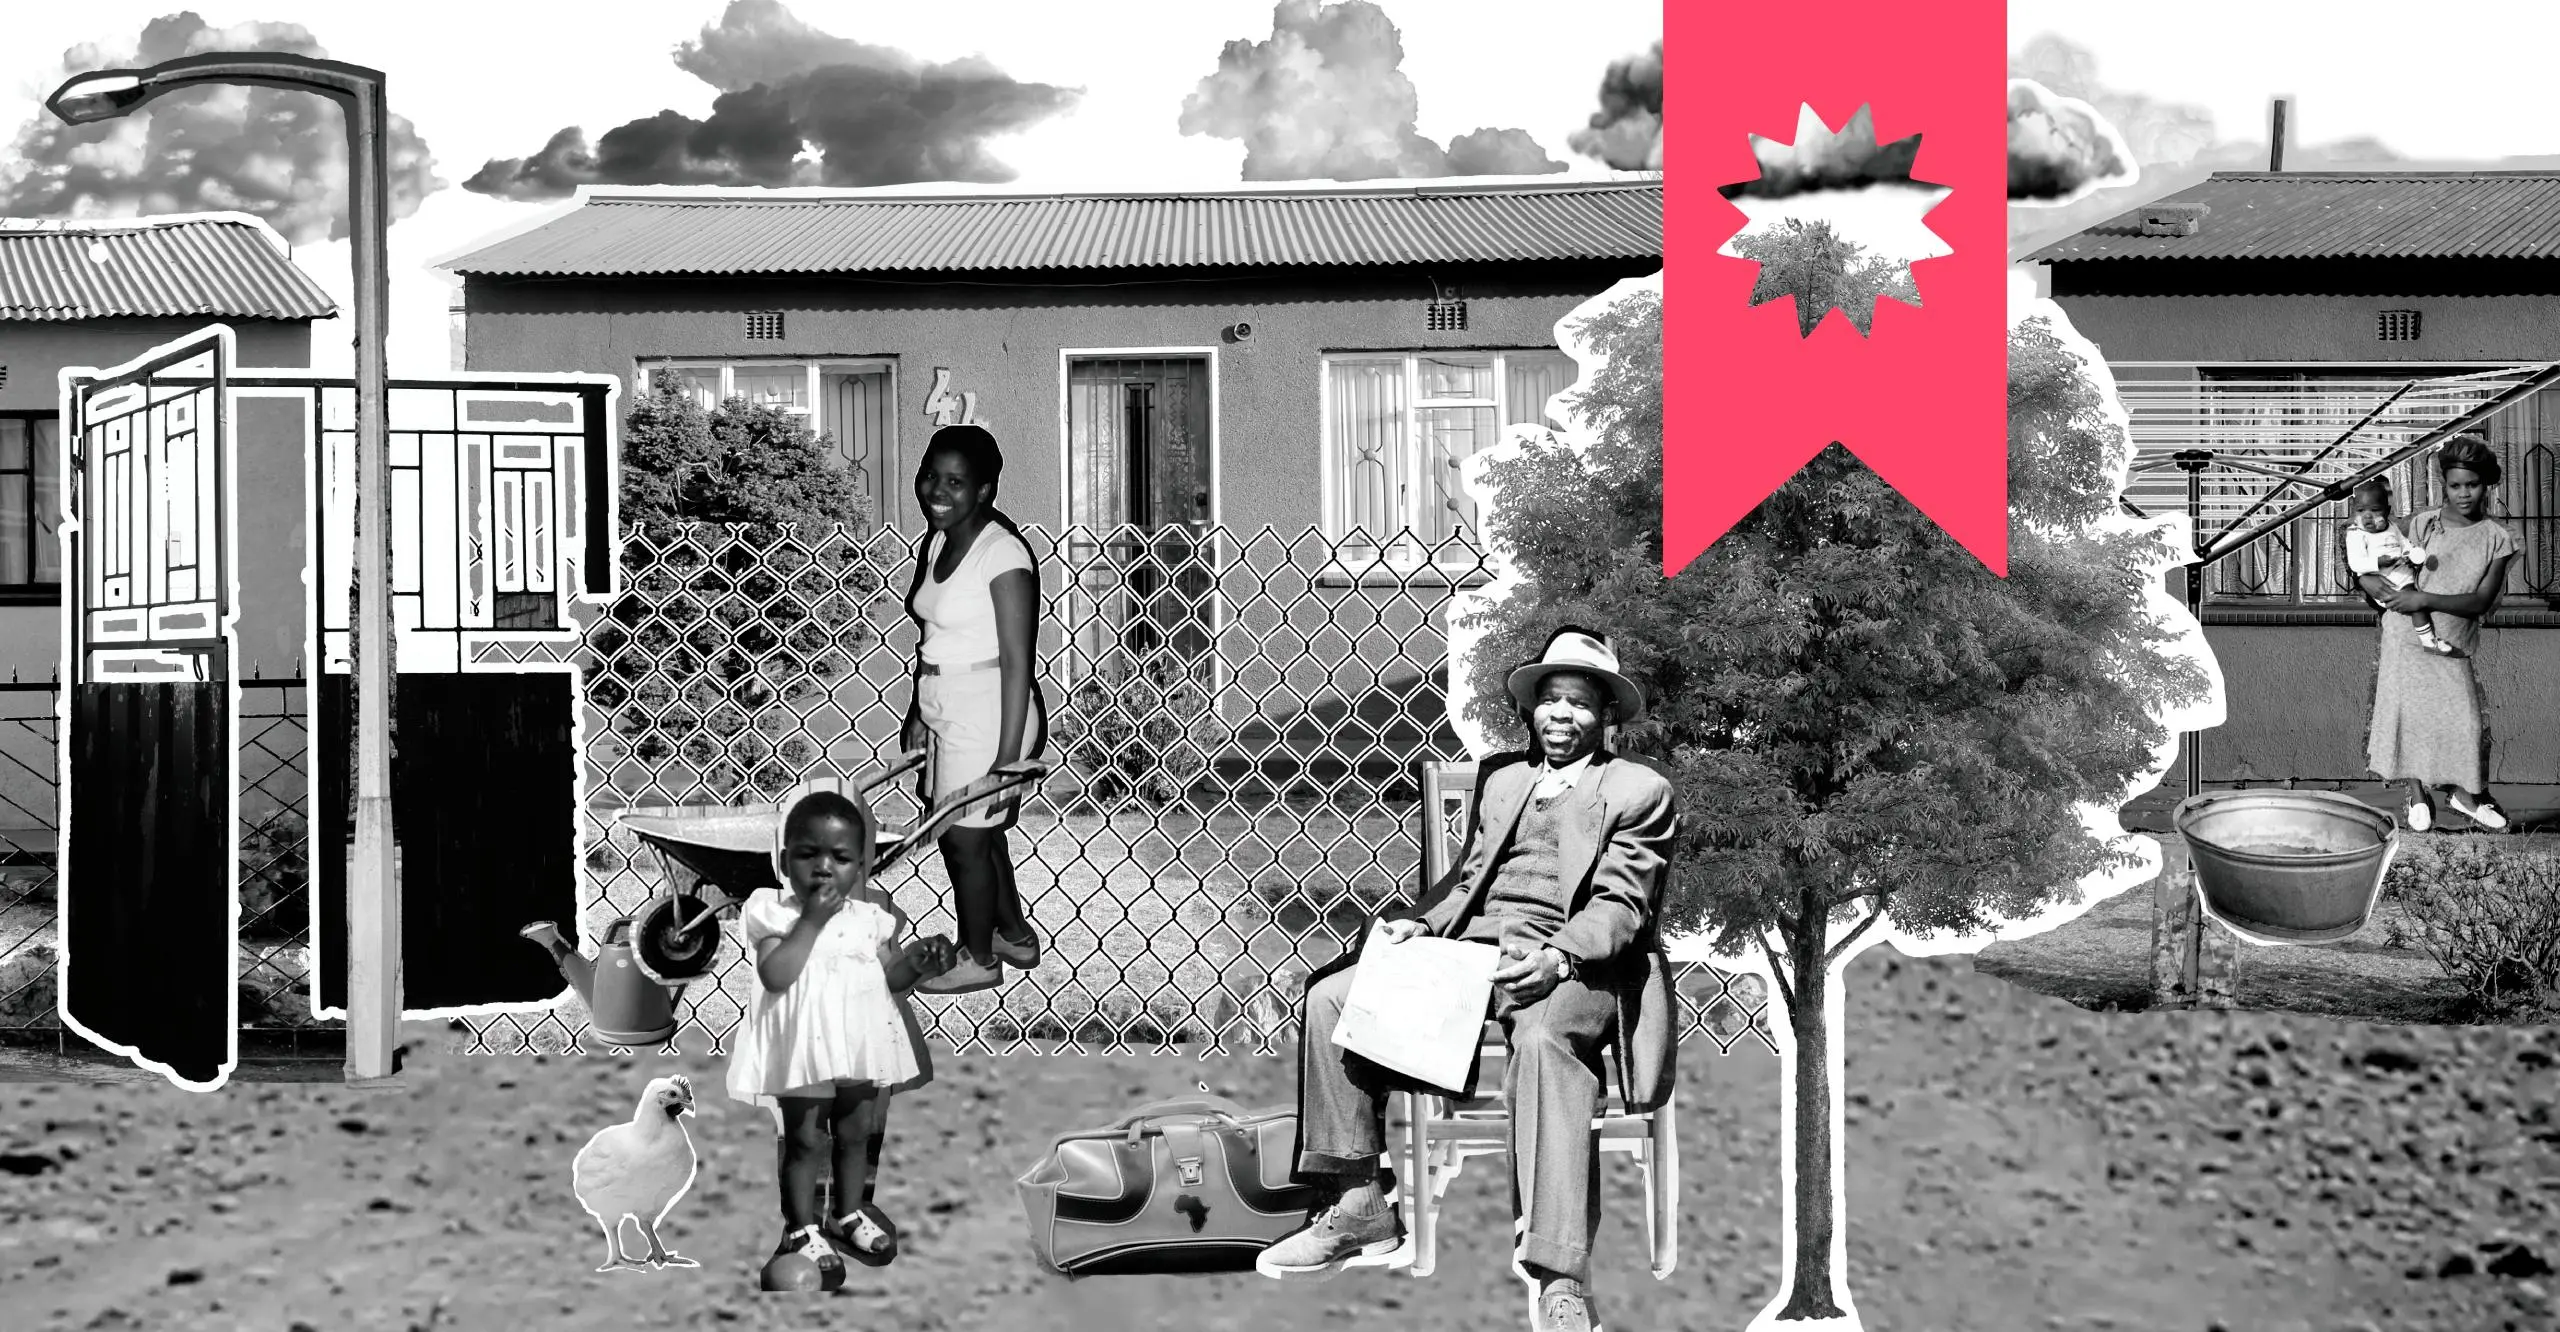 Black and white collage image of two  women, one of whom is carrying a baby, a man and a small  child, a tree, a streetlamp and a door in front of three  houses